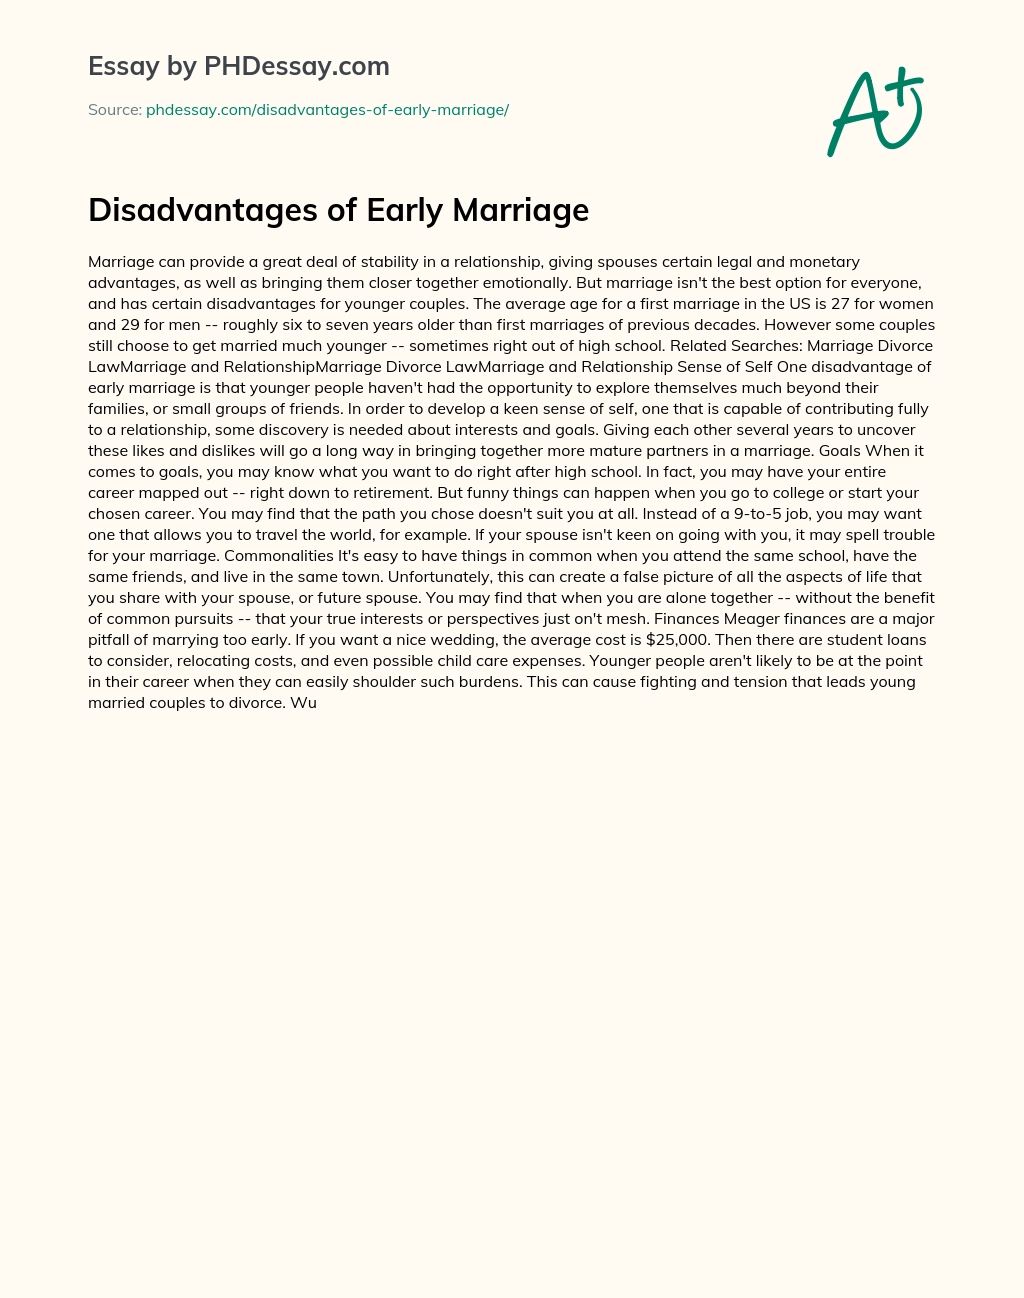 Disadvantages of Early Marriage essay